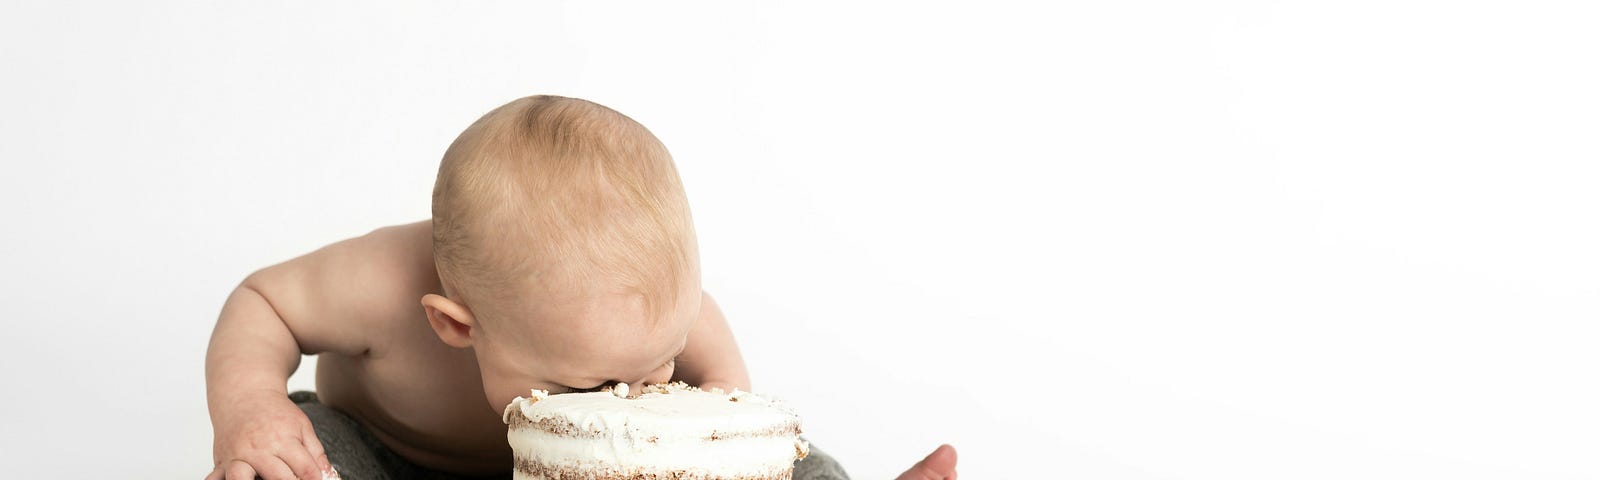 A baby plunges its face into a cake